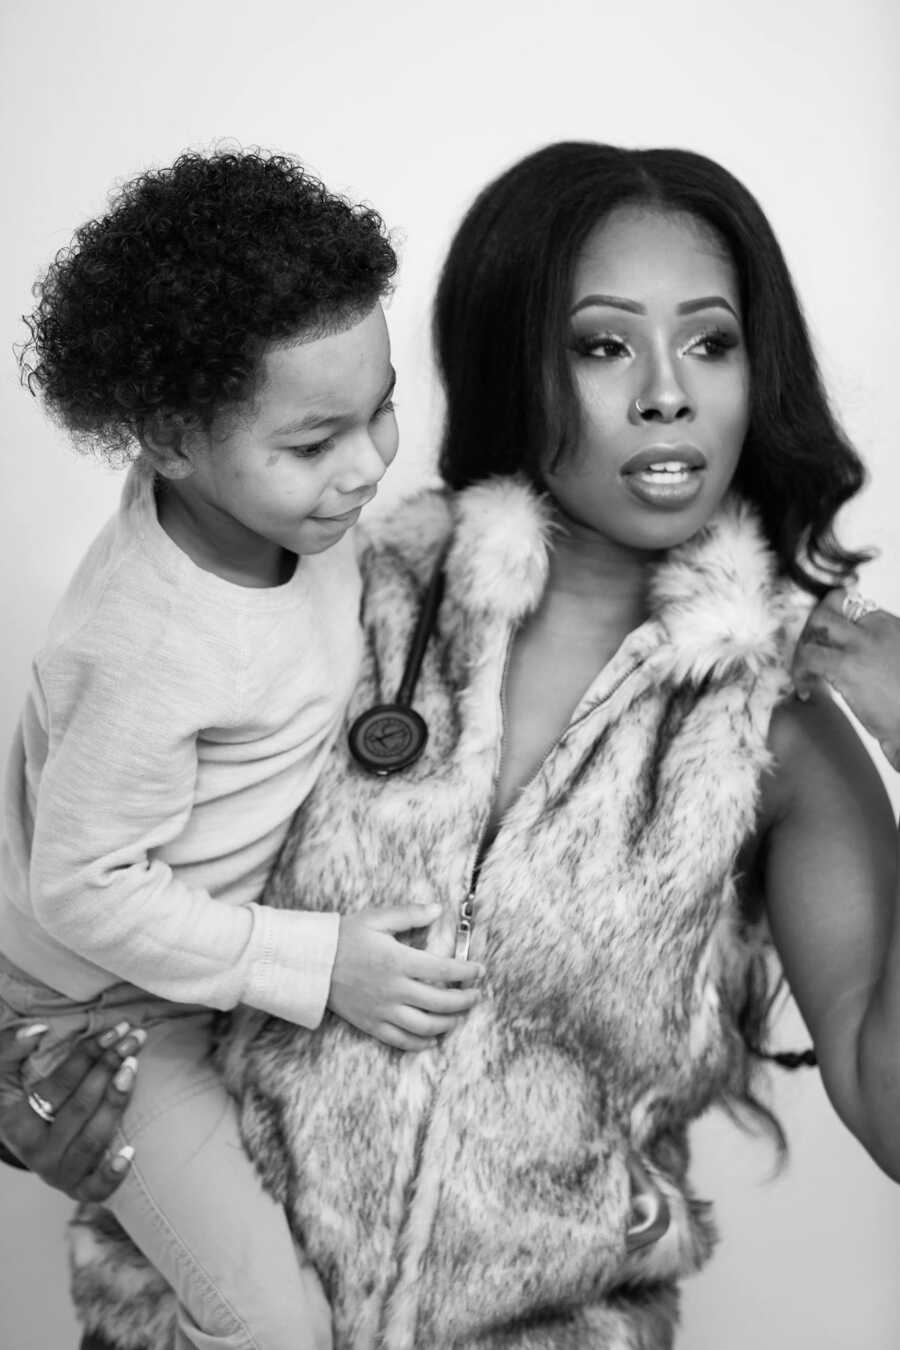 Single mom holds youngest son in stunning black and white photo.